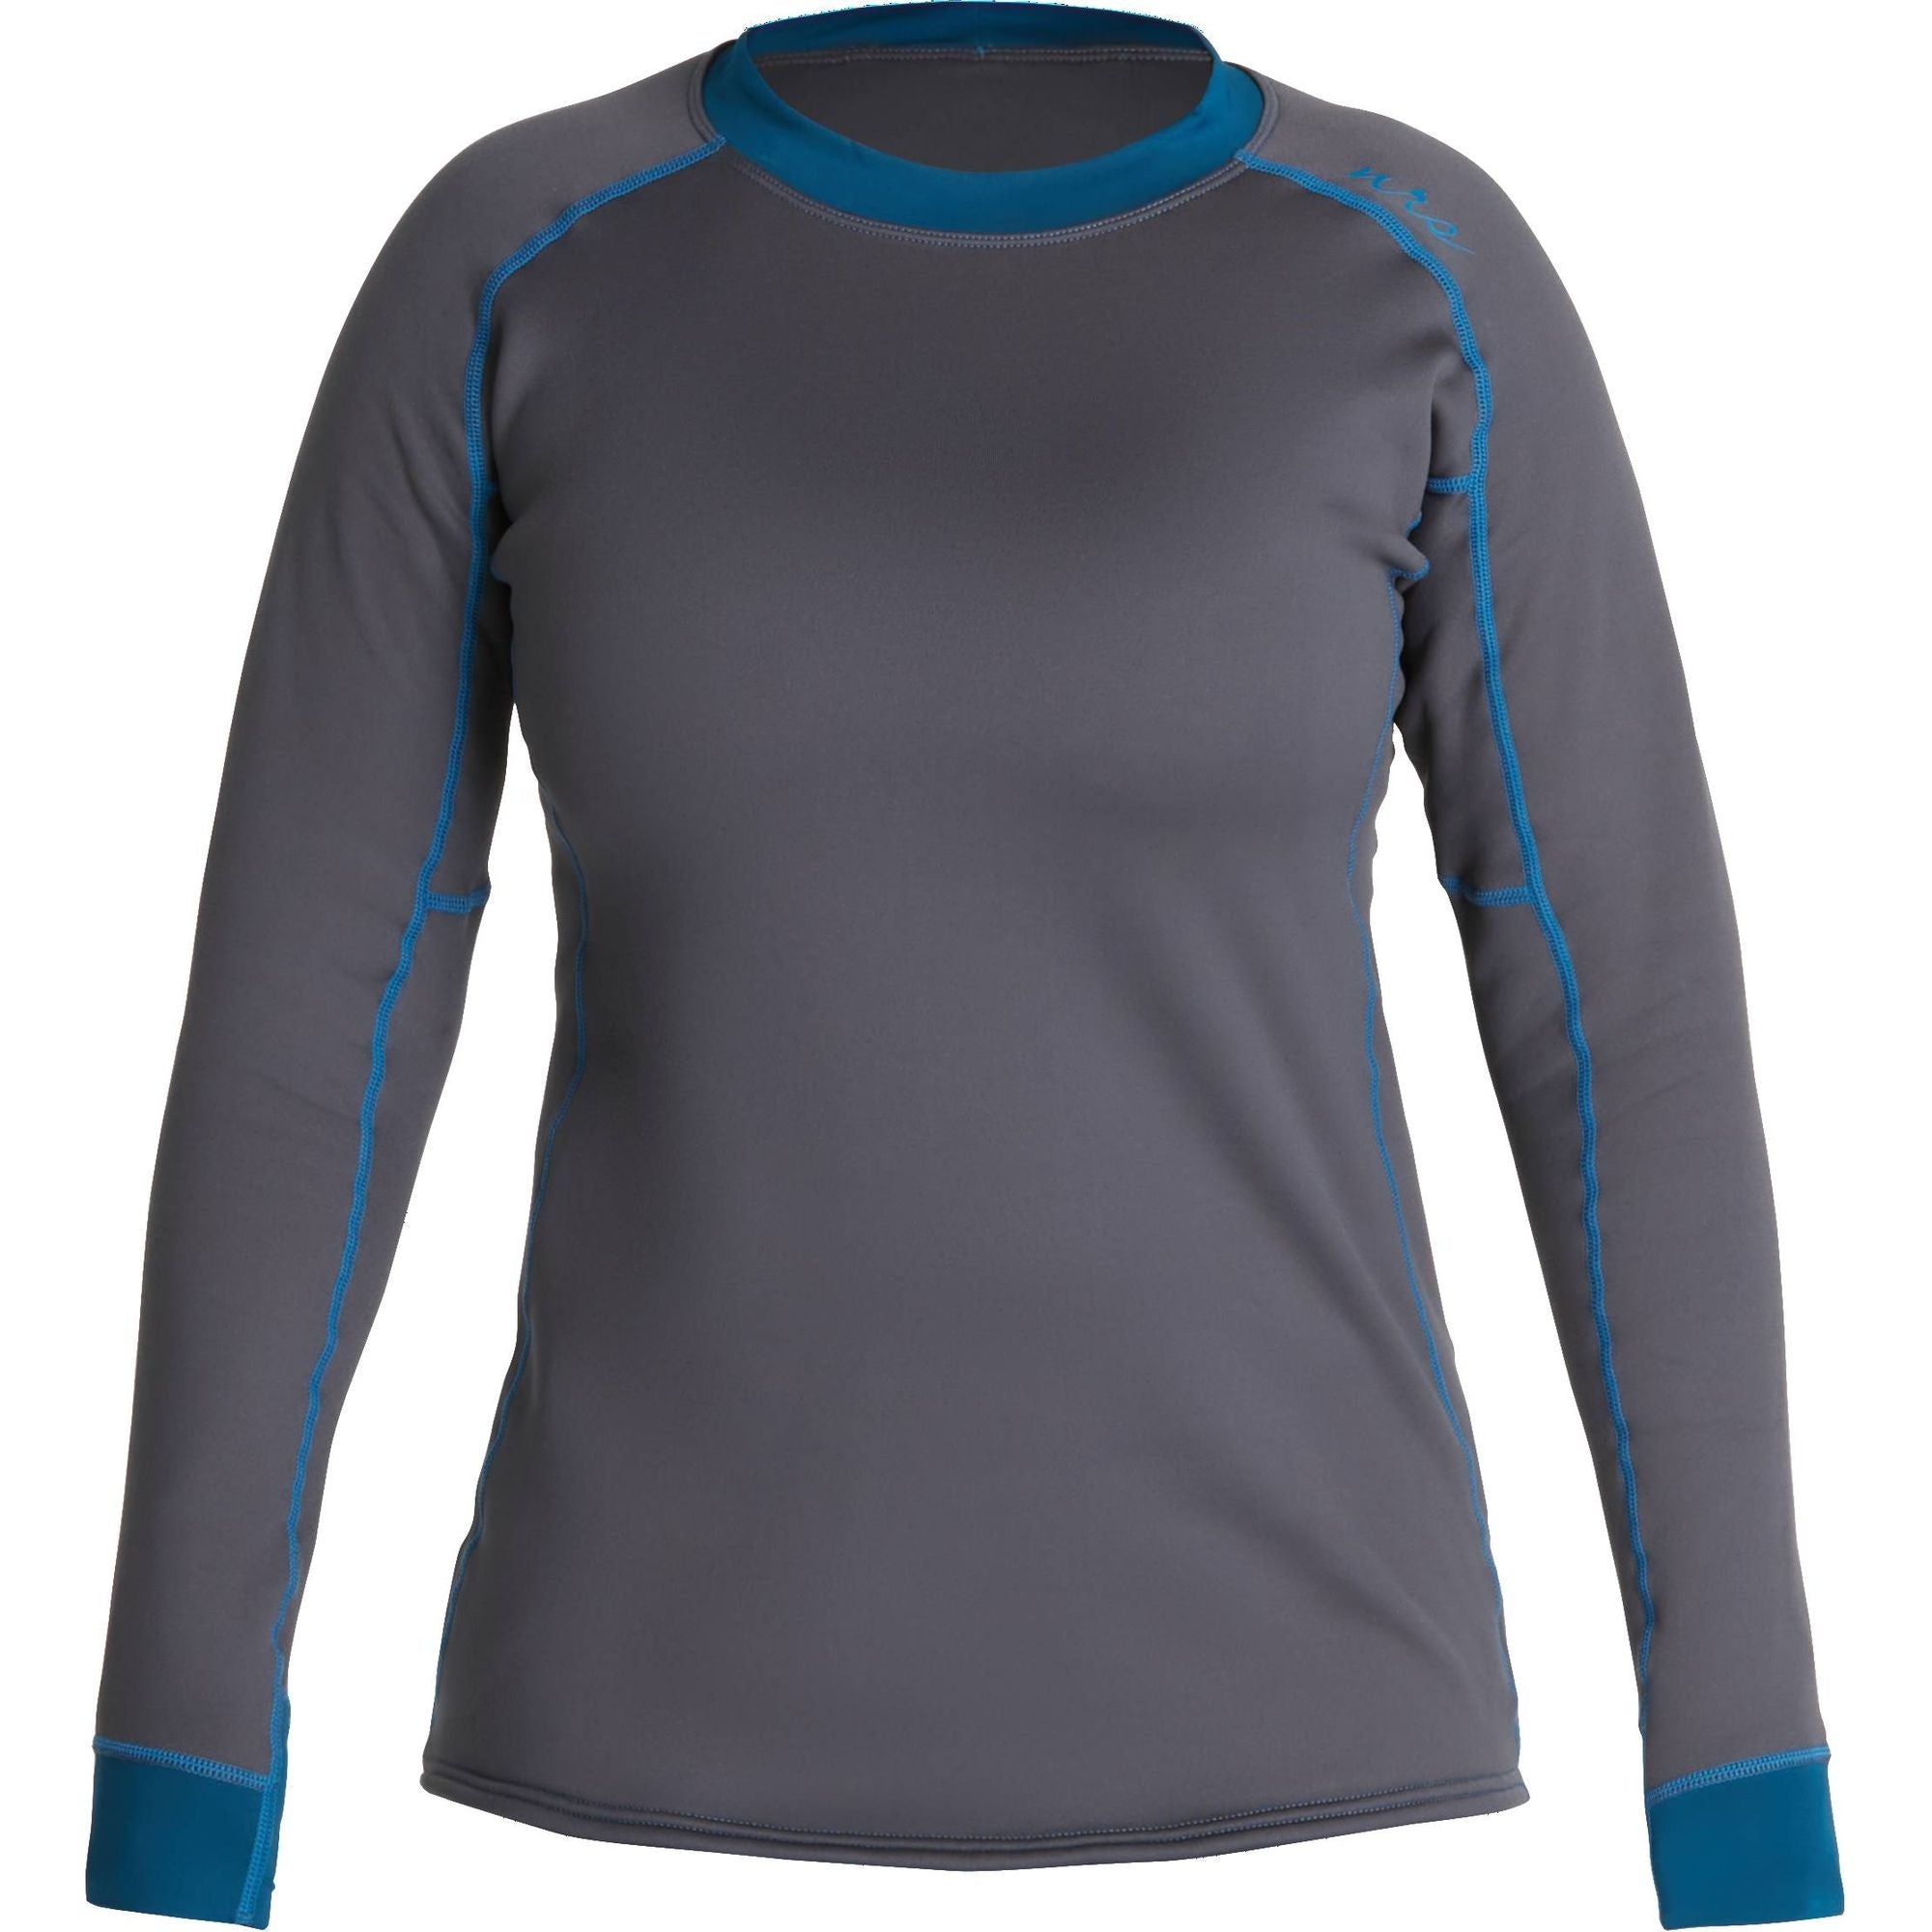 NRS - Expedition Weight Shirt Women's